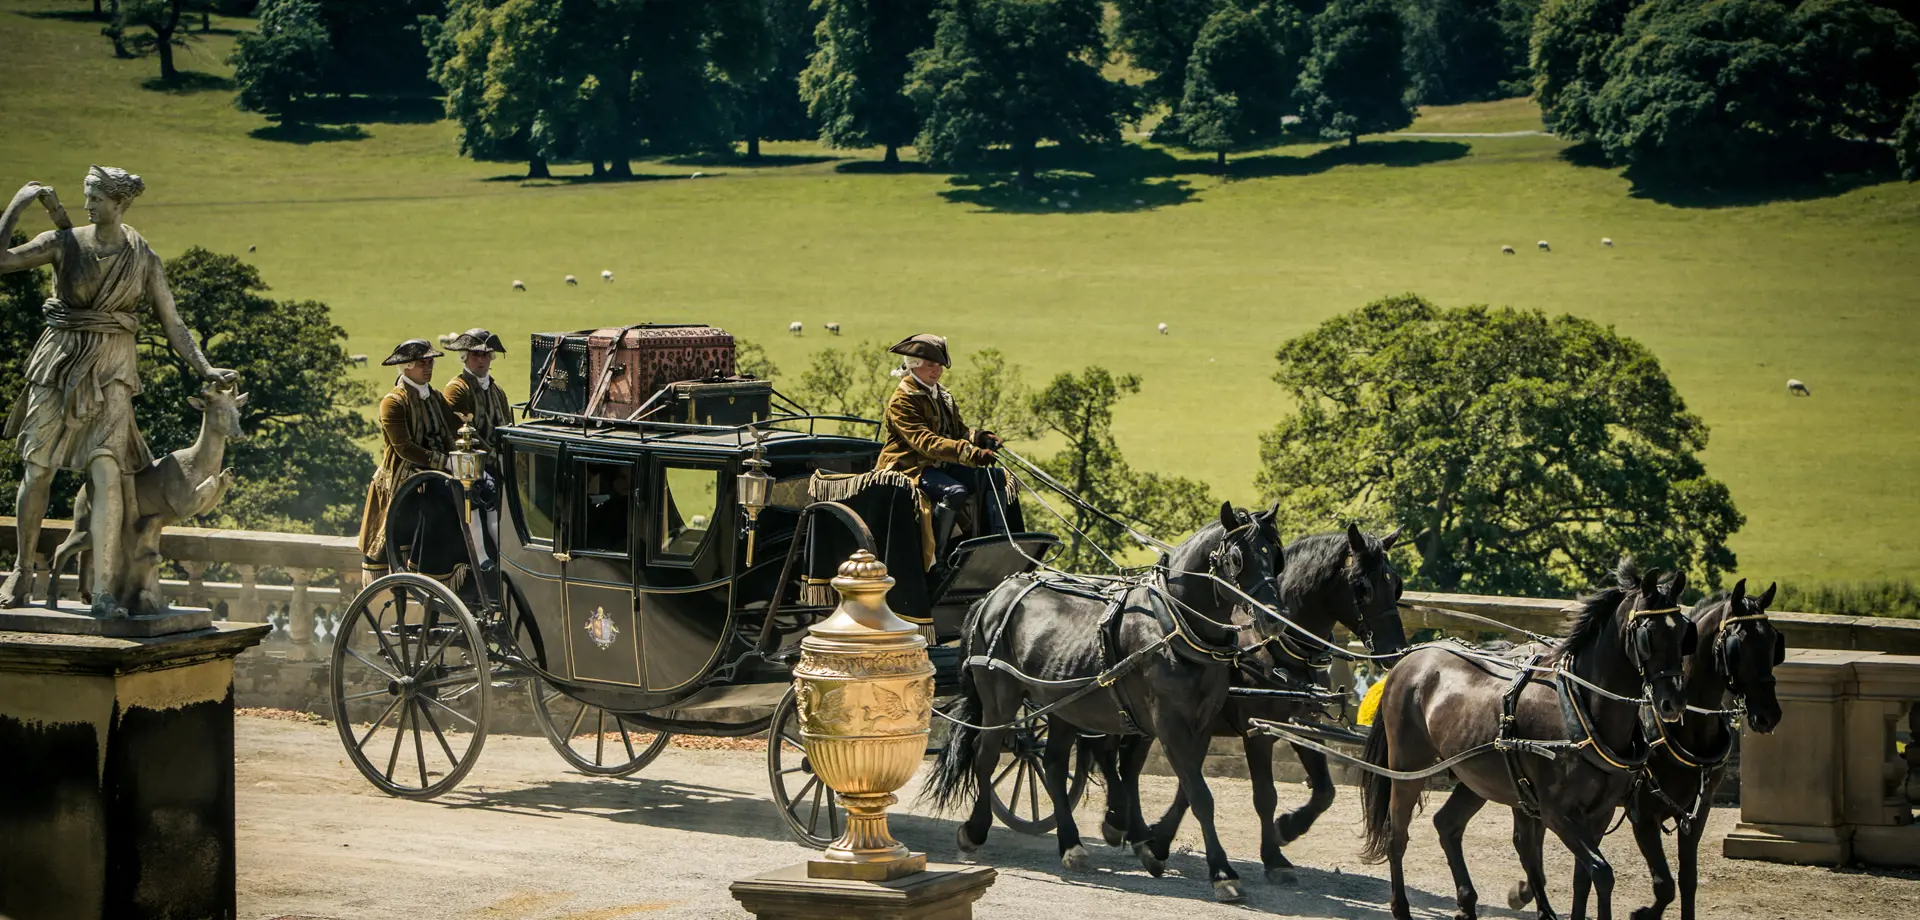 What was filmed at Chatsworth House?